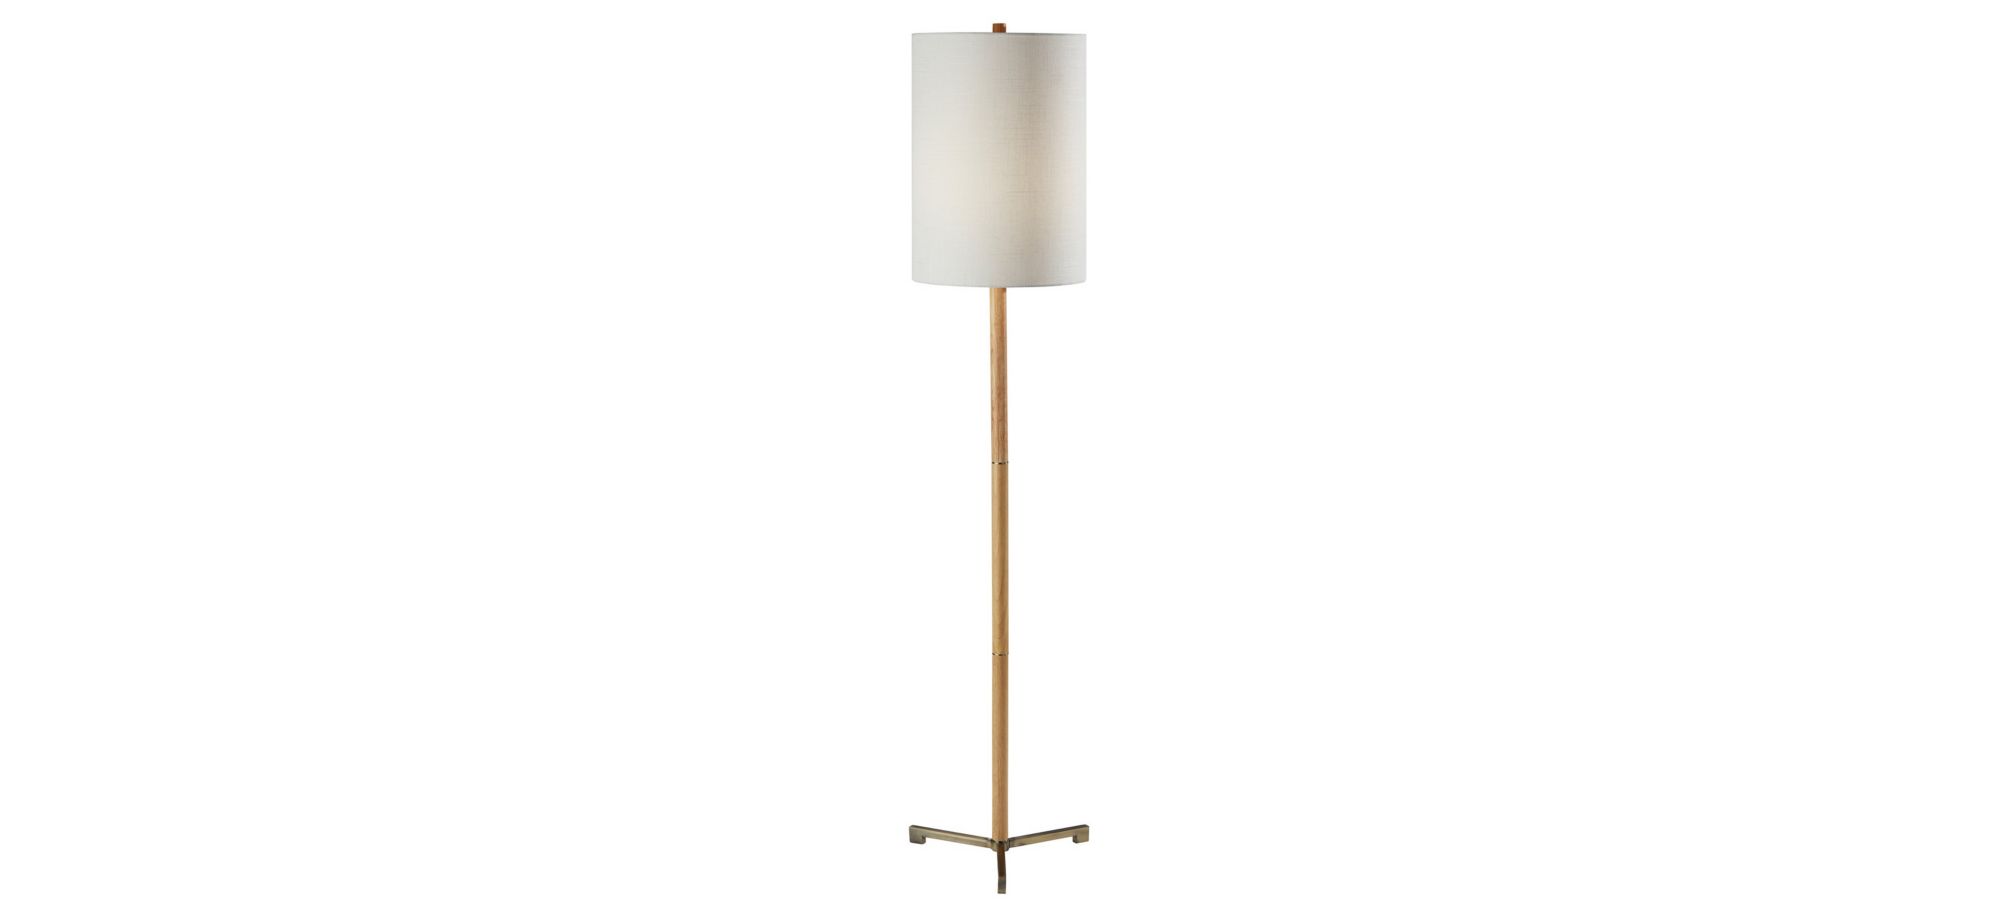 Maddox Floor Lamp in Natural by Adesso Inc